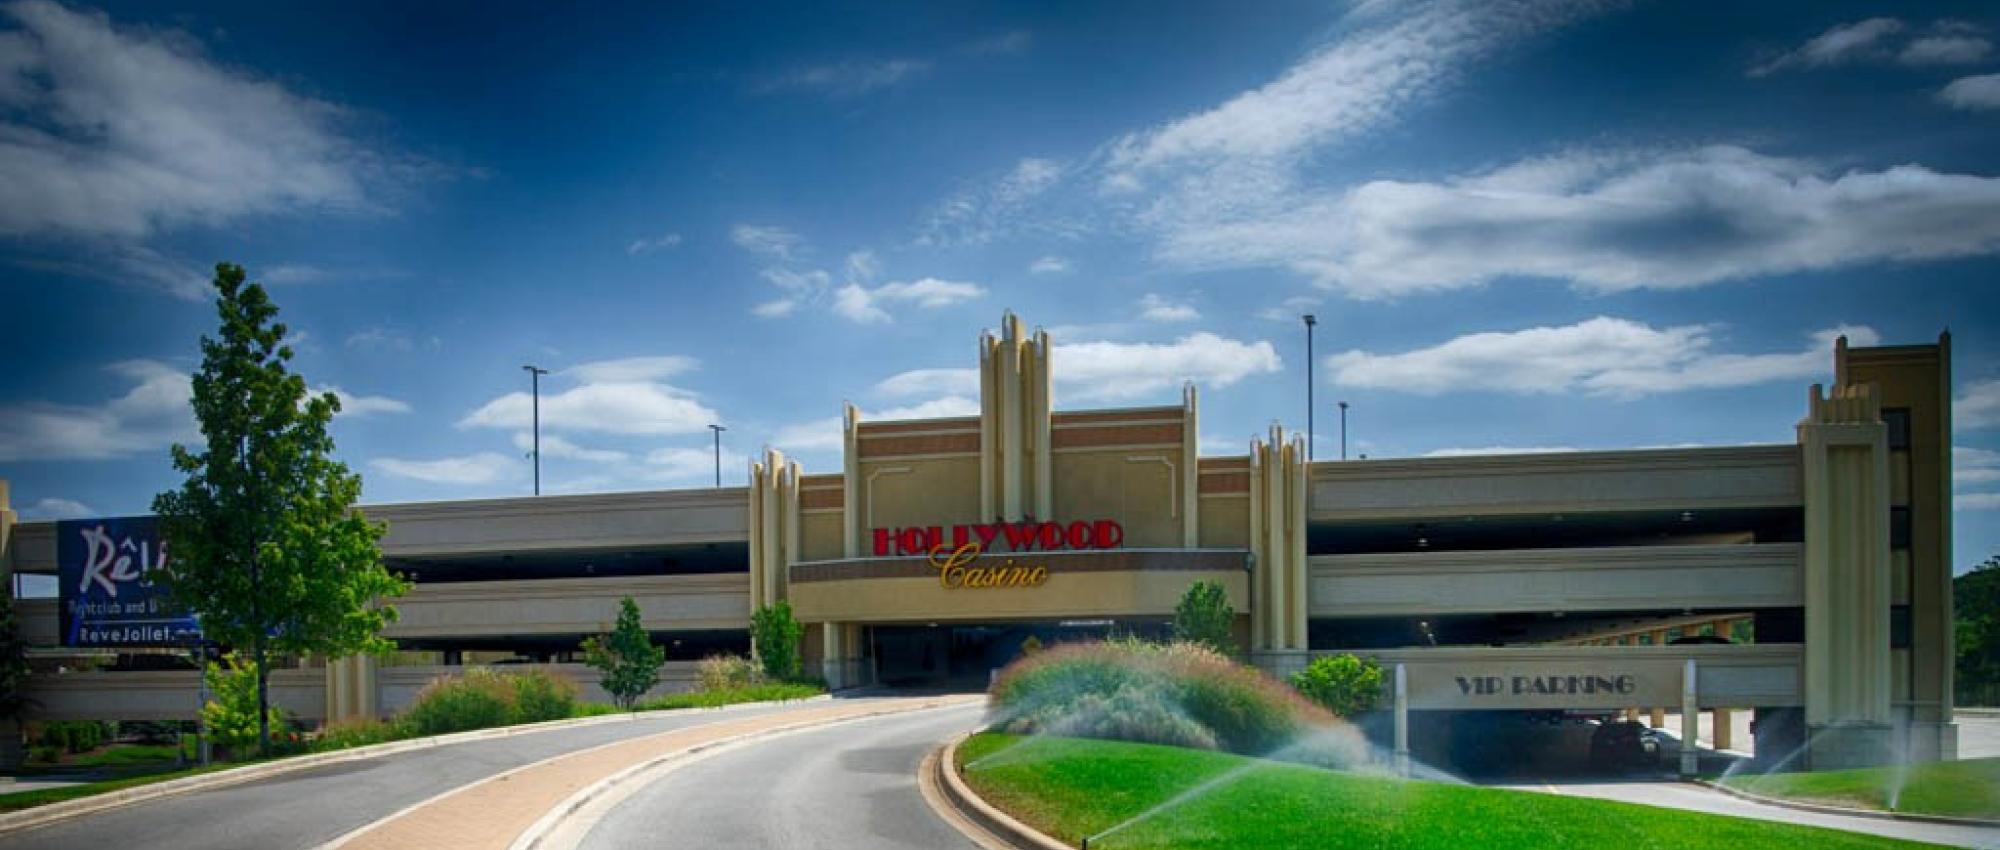 Hollywood Casino front